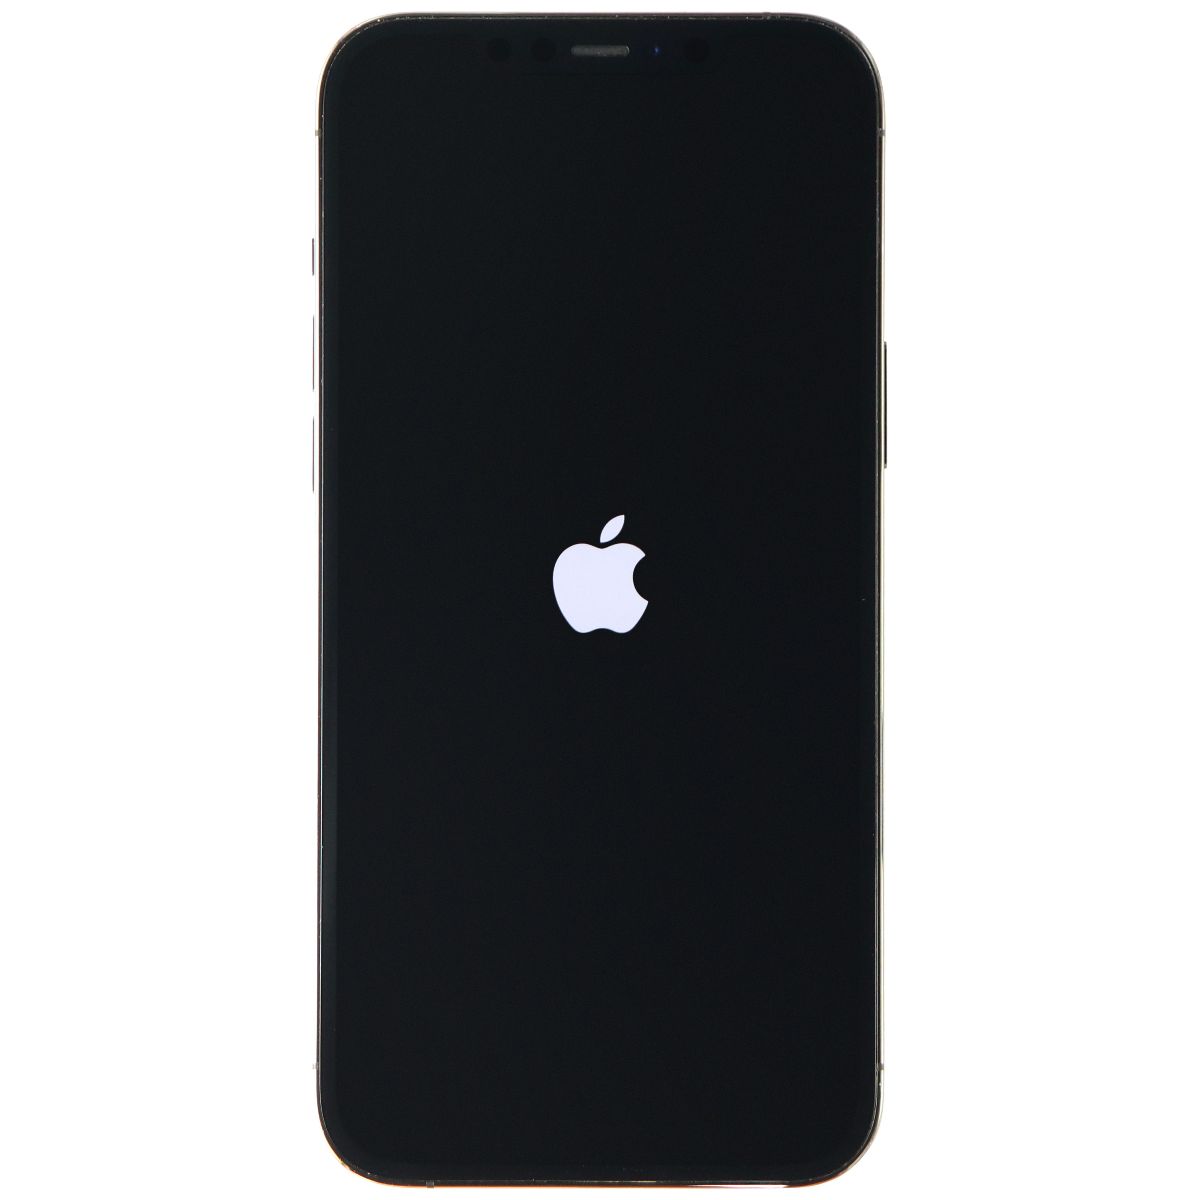 DEMO Apple iPhone 12 Pro (6.1-inch) A2341 (NO IMEI/NO CARRIER) - 128GB/Graphite Cell Phones & Smartphones Apple    - Simple Cell Bulk Wholesale Pricing - USA Seller